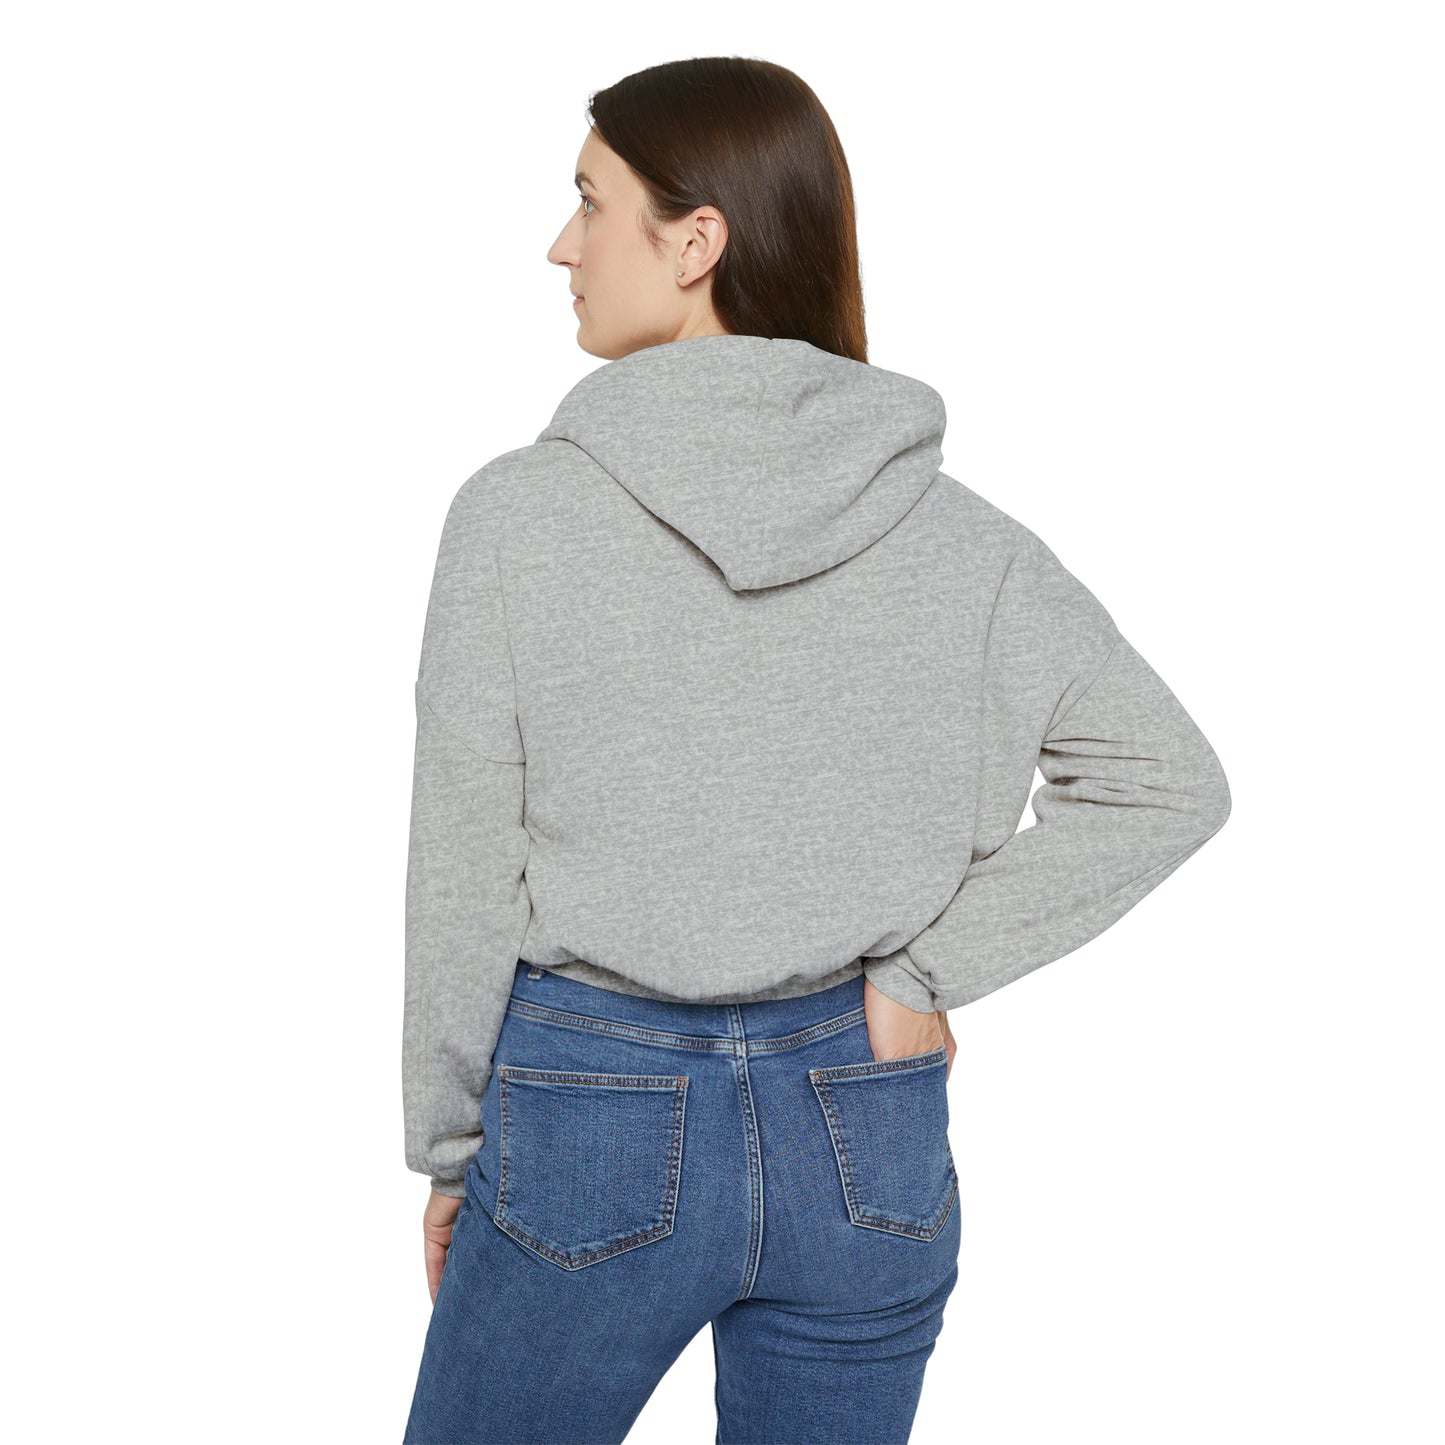 Cropped Perfect Match Hoodie